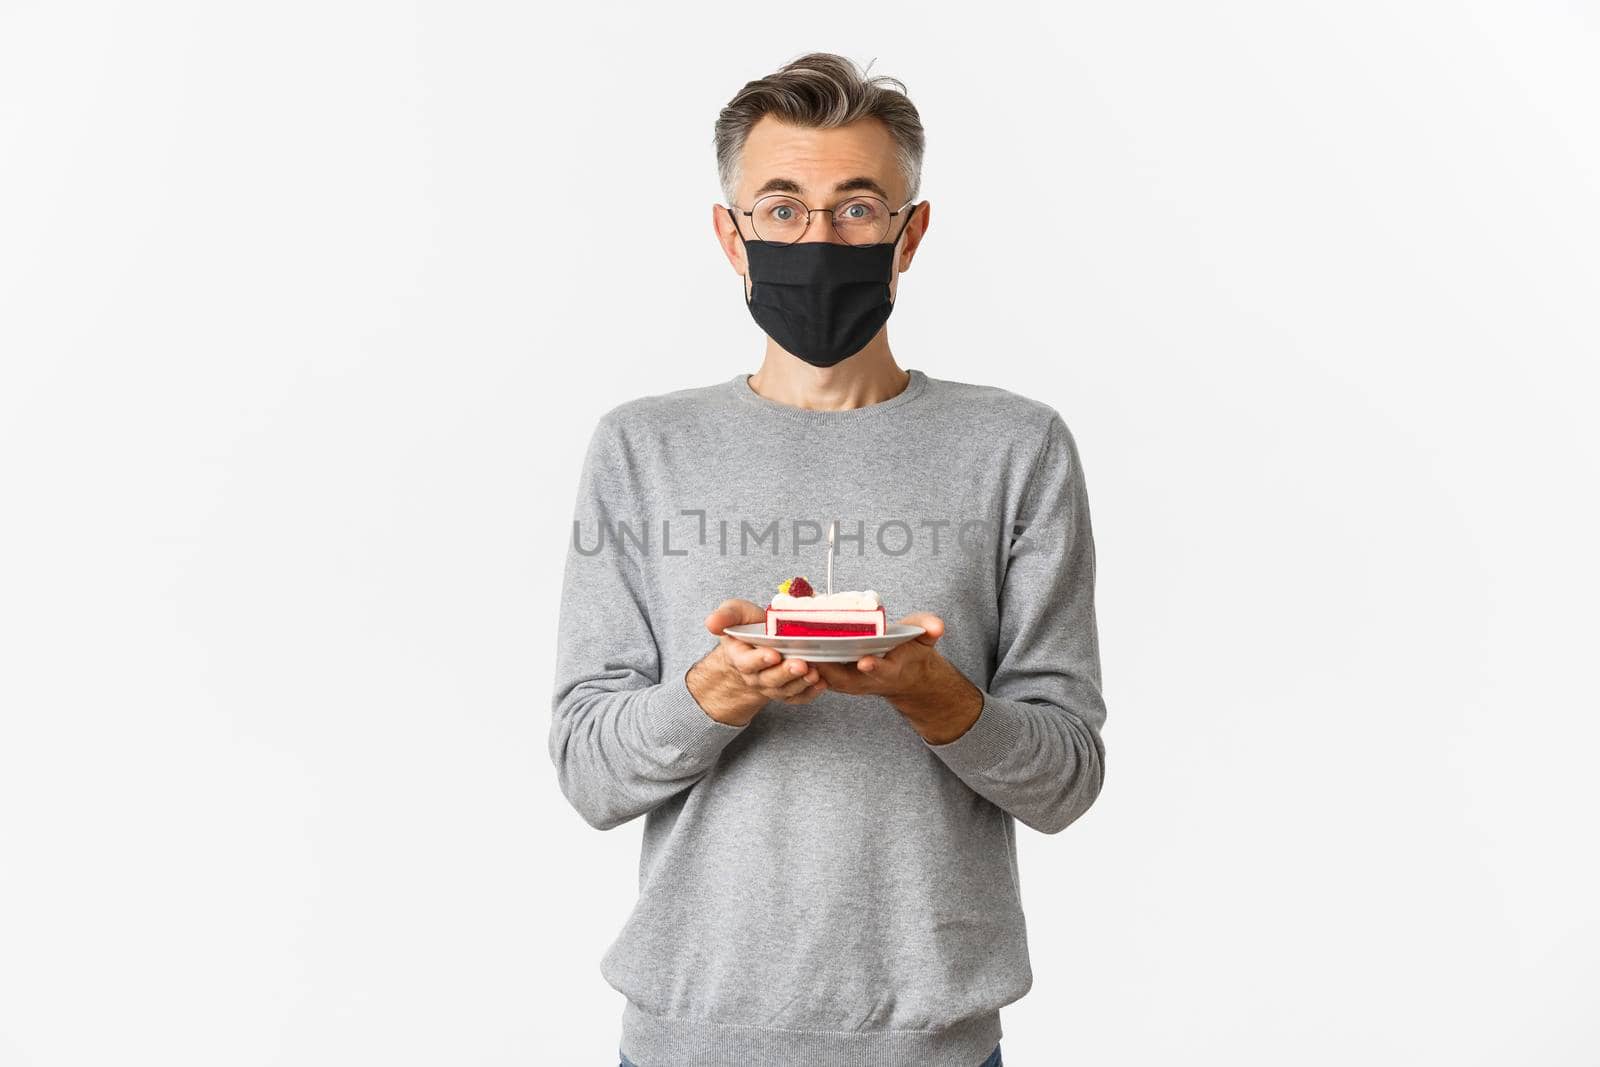 Concept of covid-19, quarantine and holidays. Portrait of amazed middle-aged man in medical mask, celebrating his birthday during coronavirus, holding b-day cake with candle.